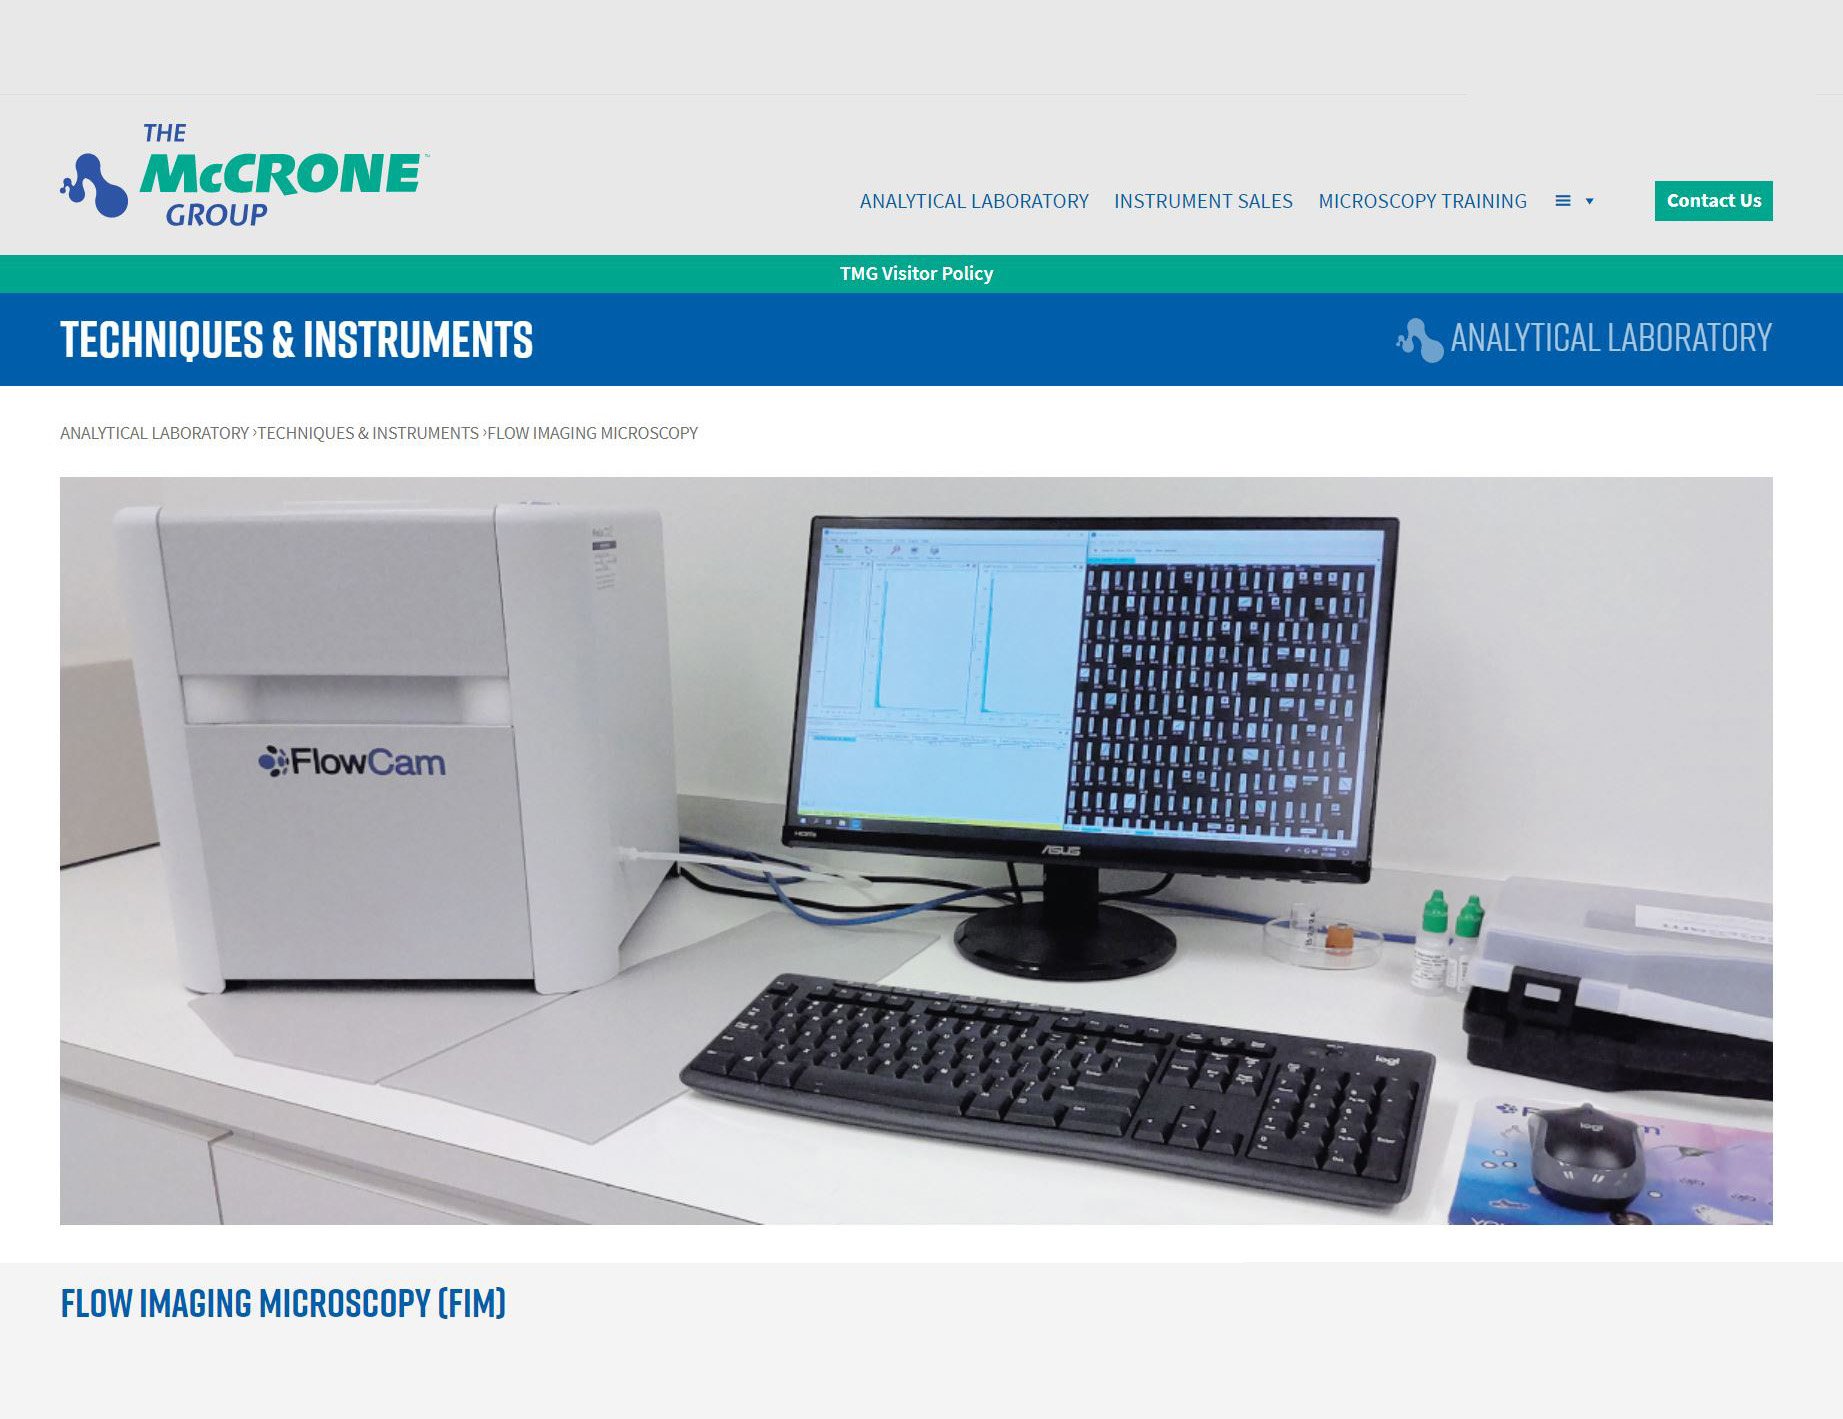 McCrone Associates Offers Particle Analysis Services with FlowCam